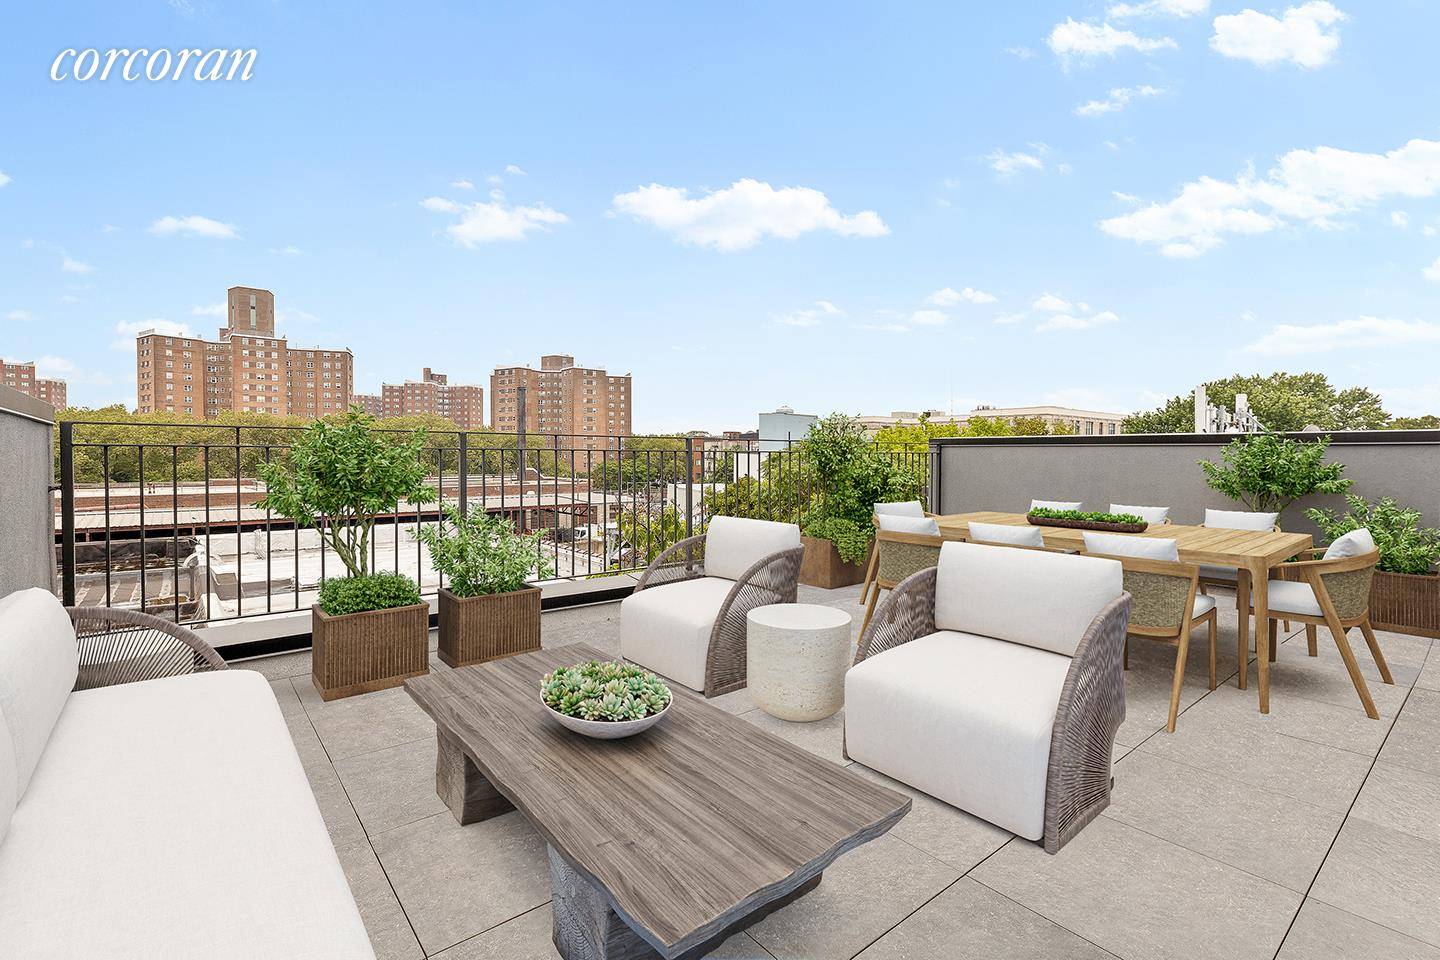 Welcome to 1572 Pacific Street, Crown Heights' newest condominiums.